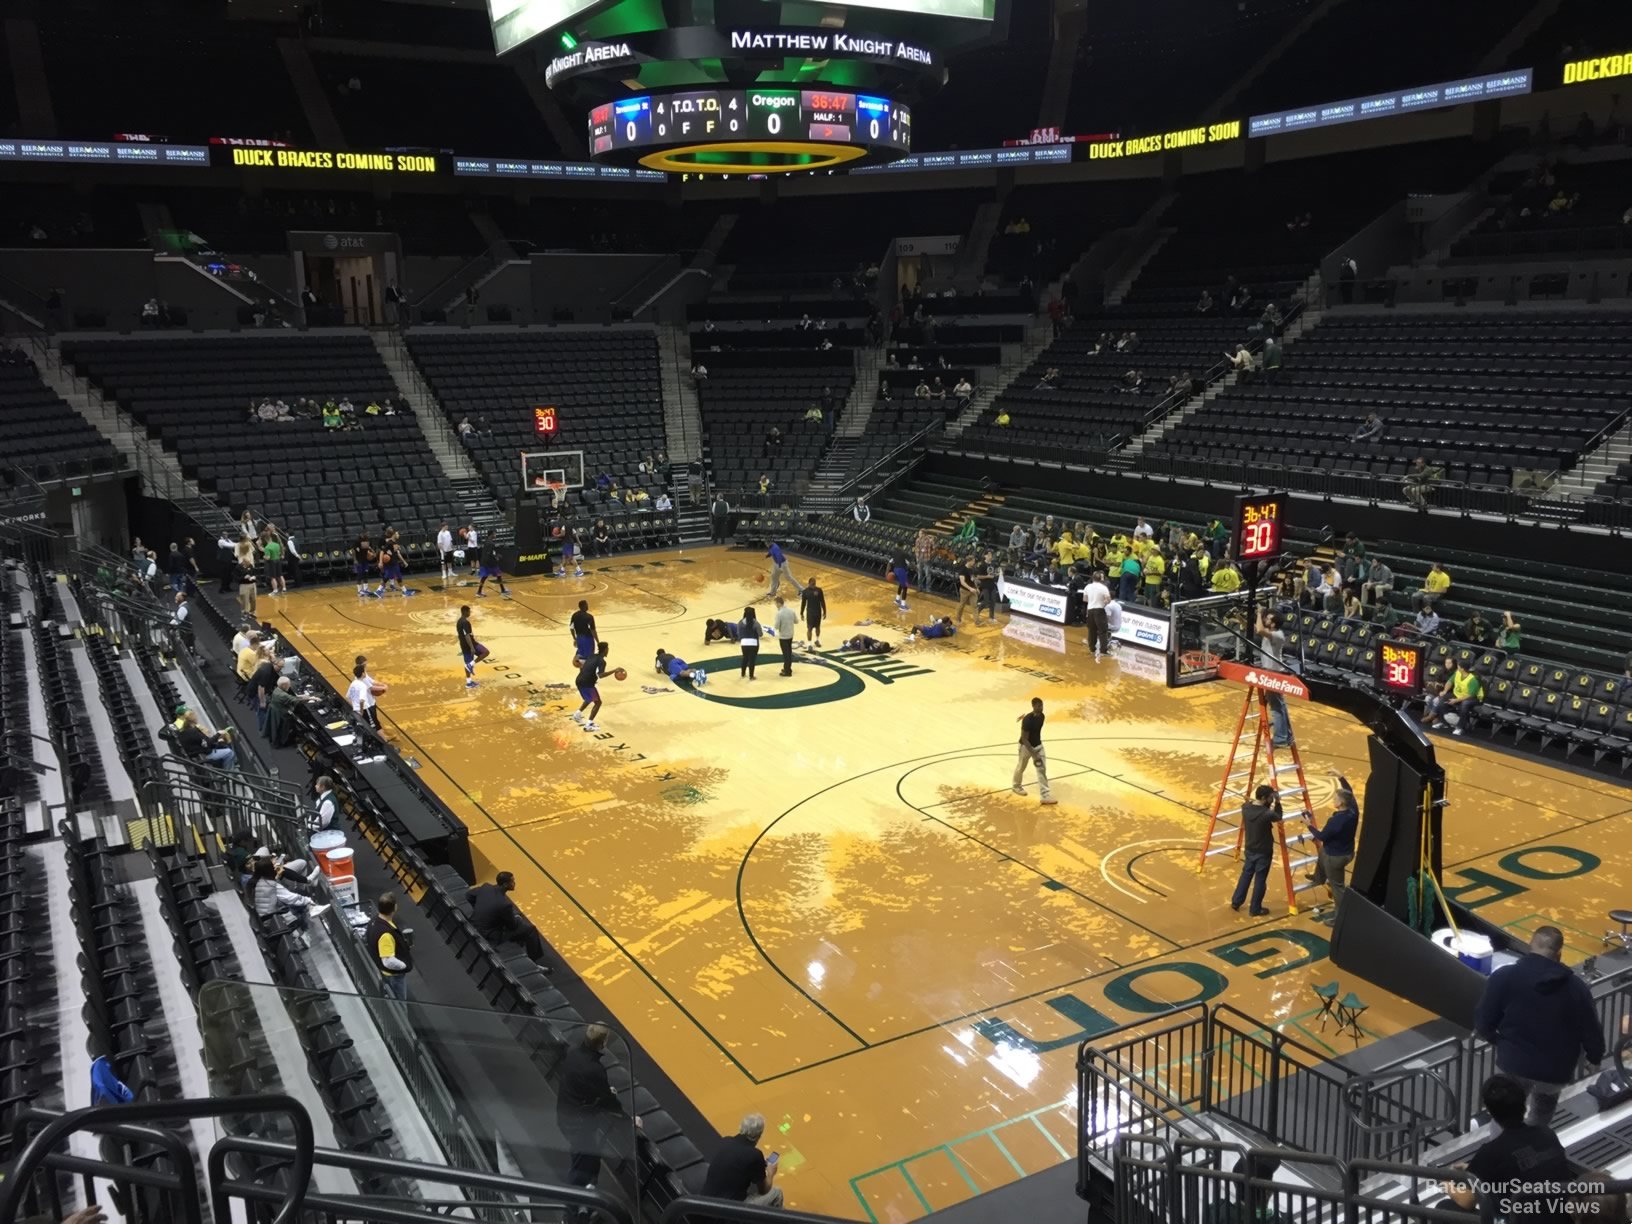 section 120, row k seat view  - matthew knight arena